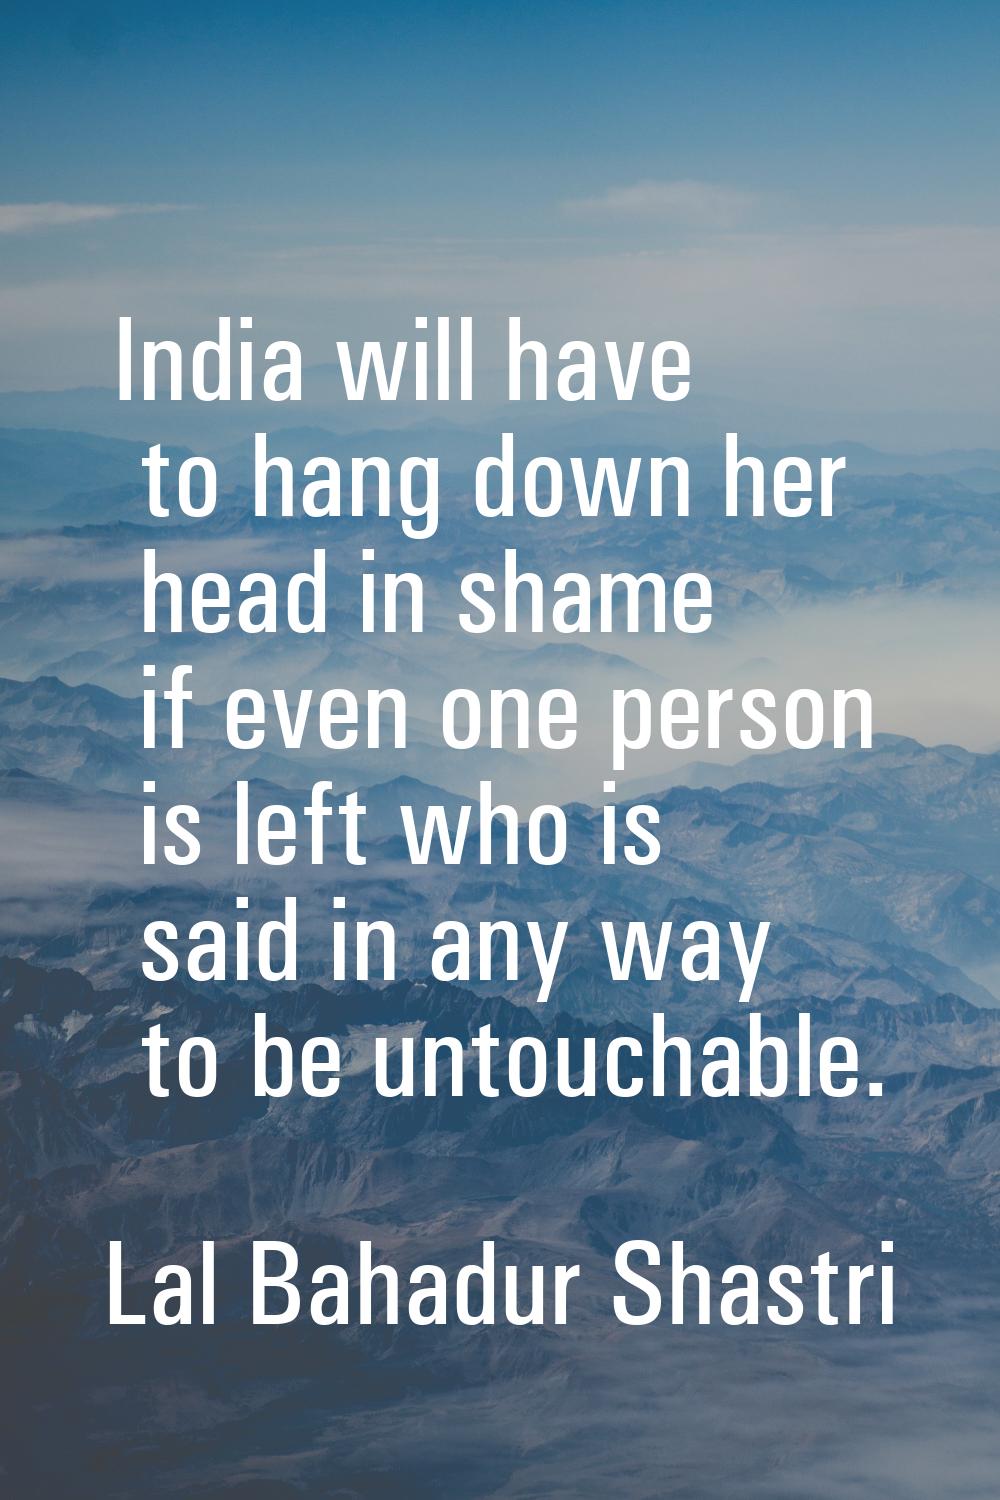 India will have to hang down her head in shame if even one person is left who is said in any way to